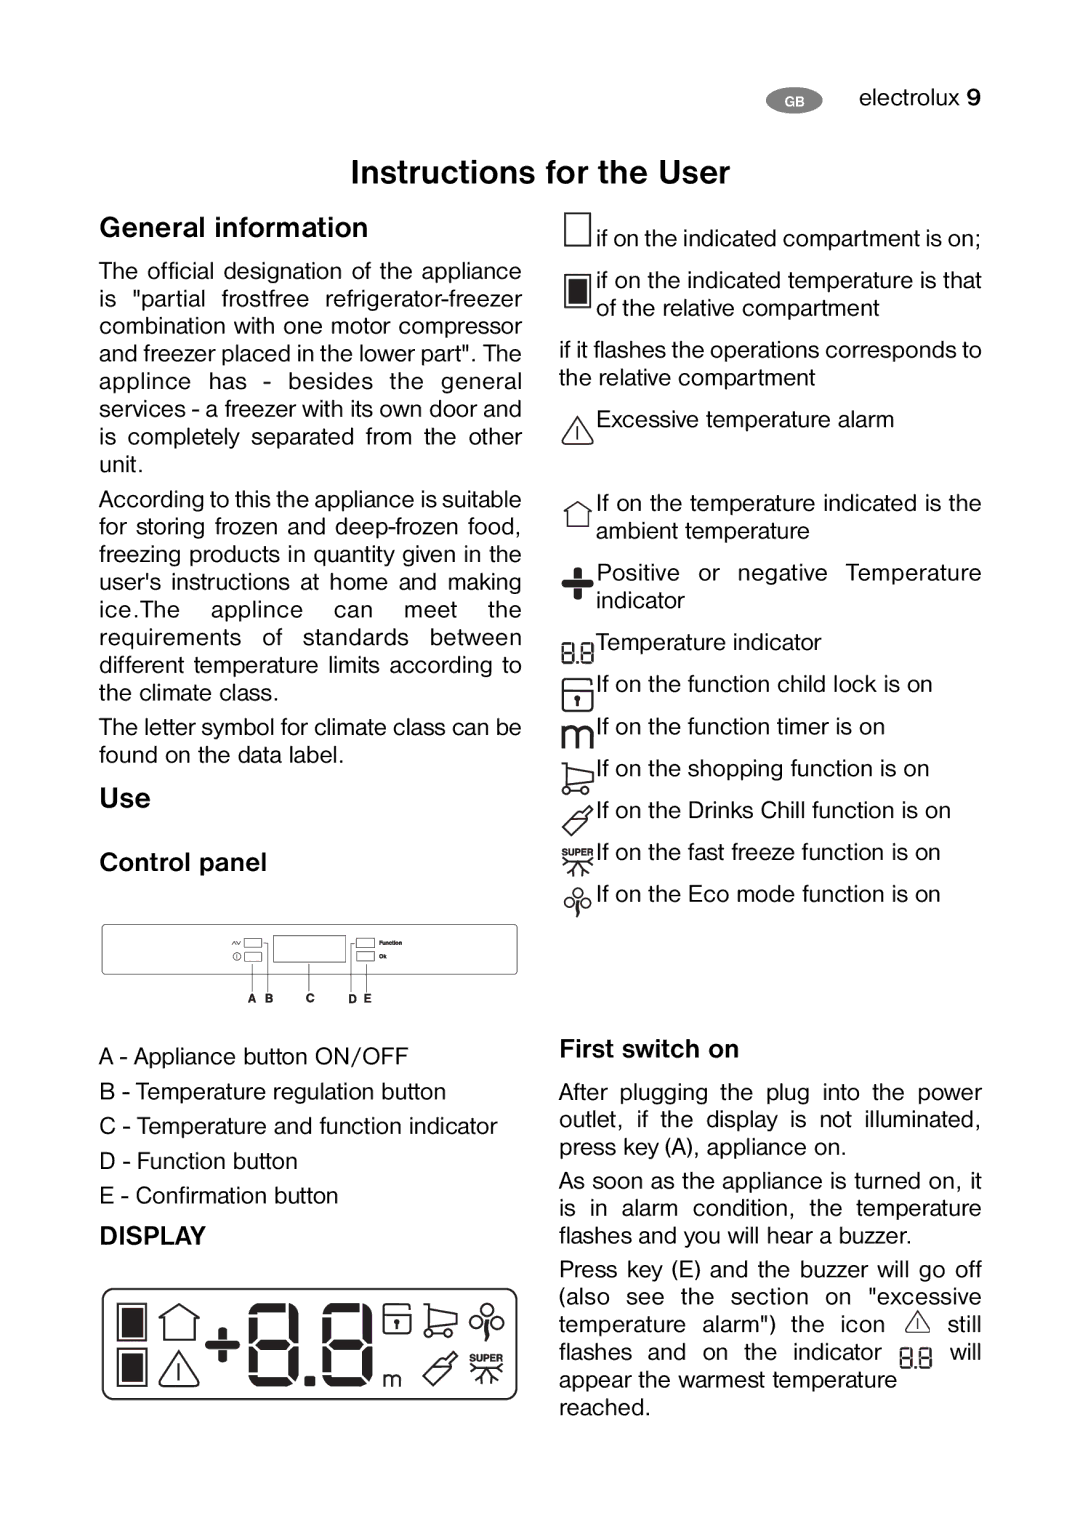 Electrolux ENB35405 S user manual Instructions for the User, General information, Control panel, First switch on 